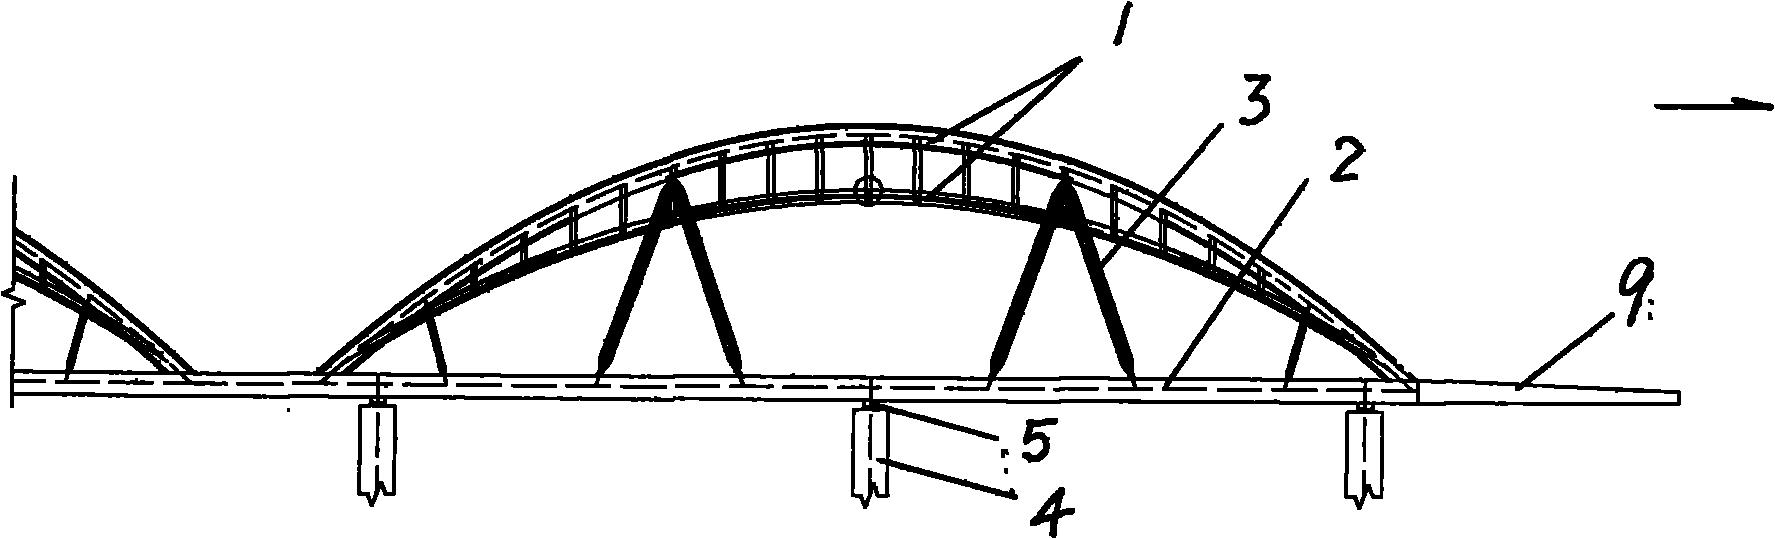 Arch bridge construction method for combined beam-steel arch combined system